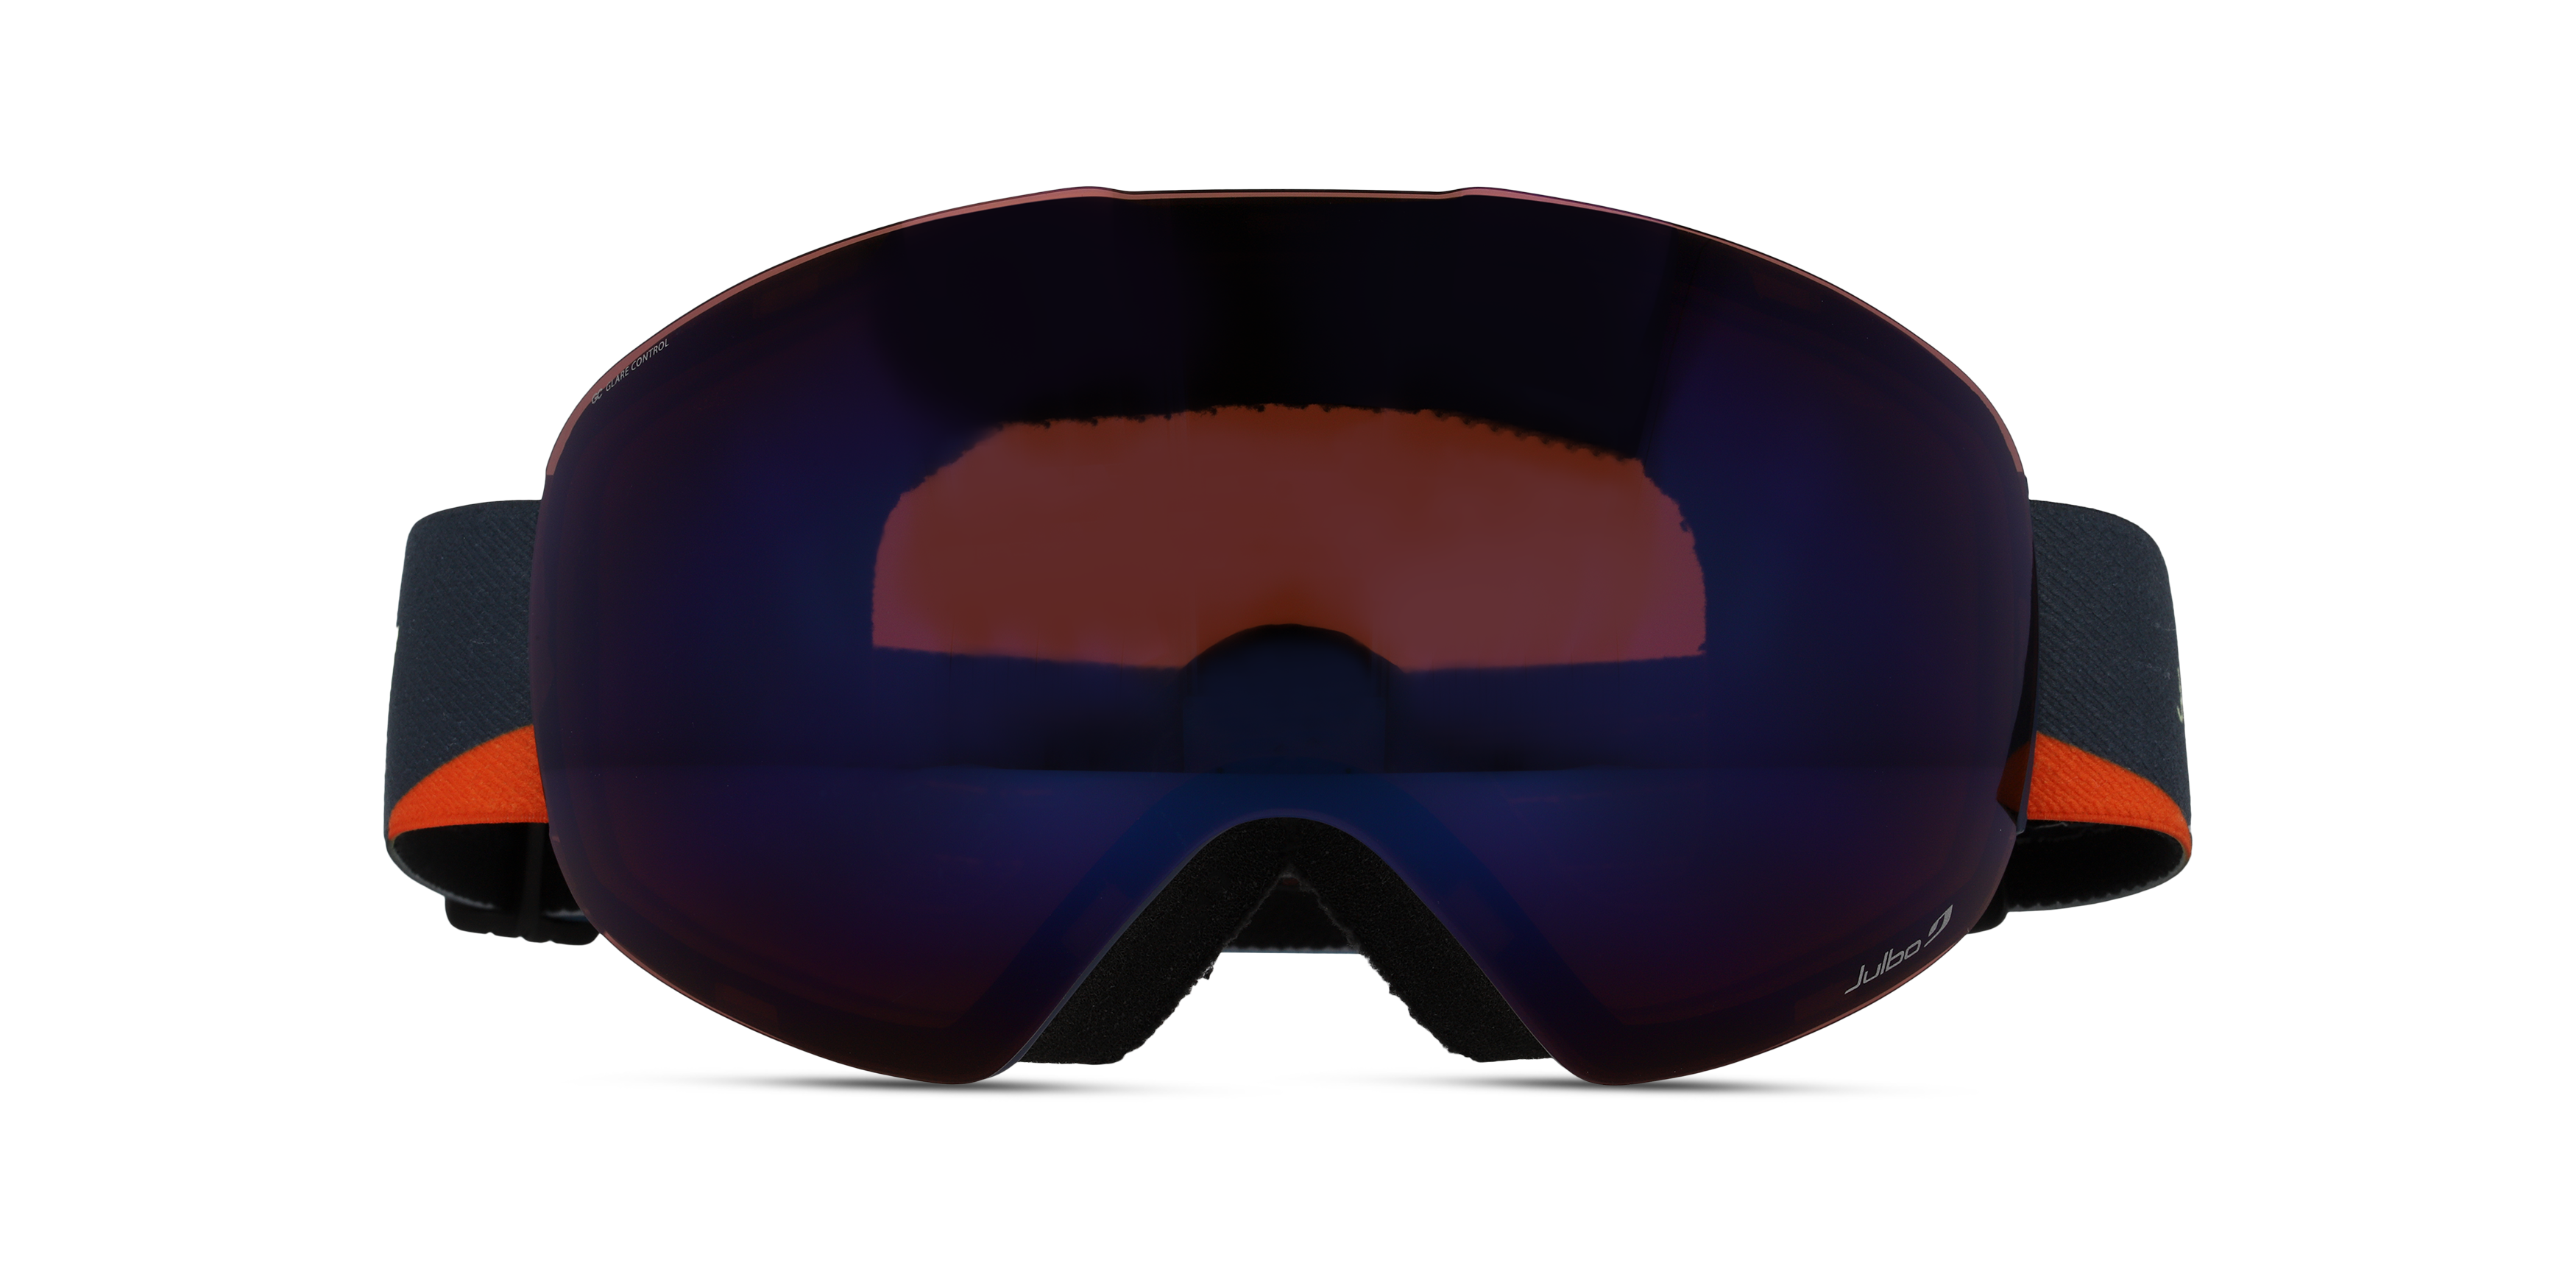 [products.image.front] JULBO J760 SPACELAB 12